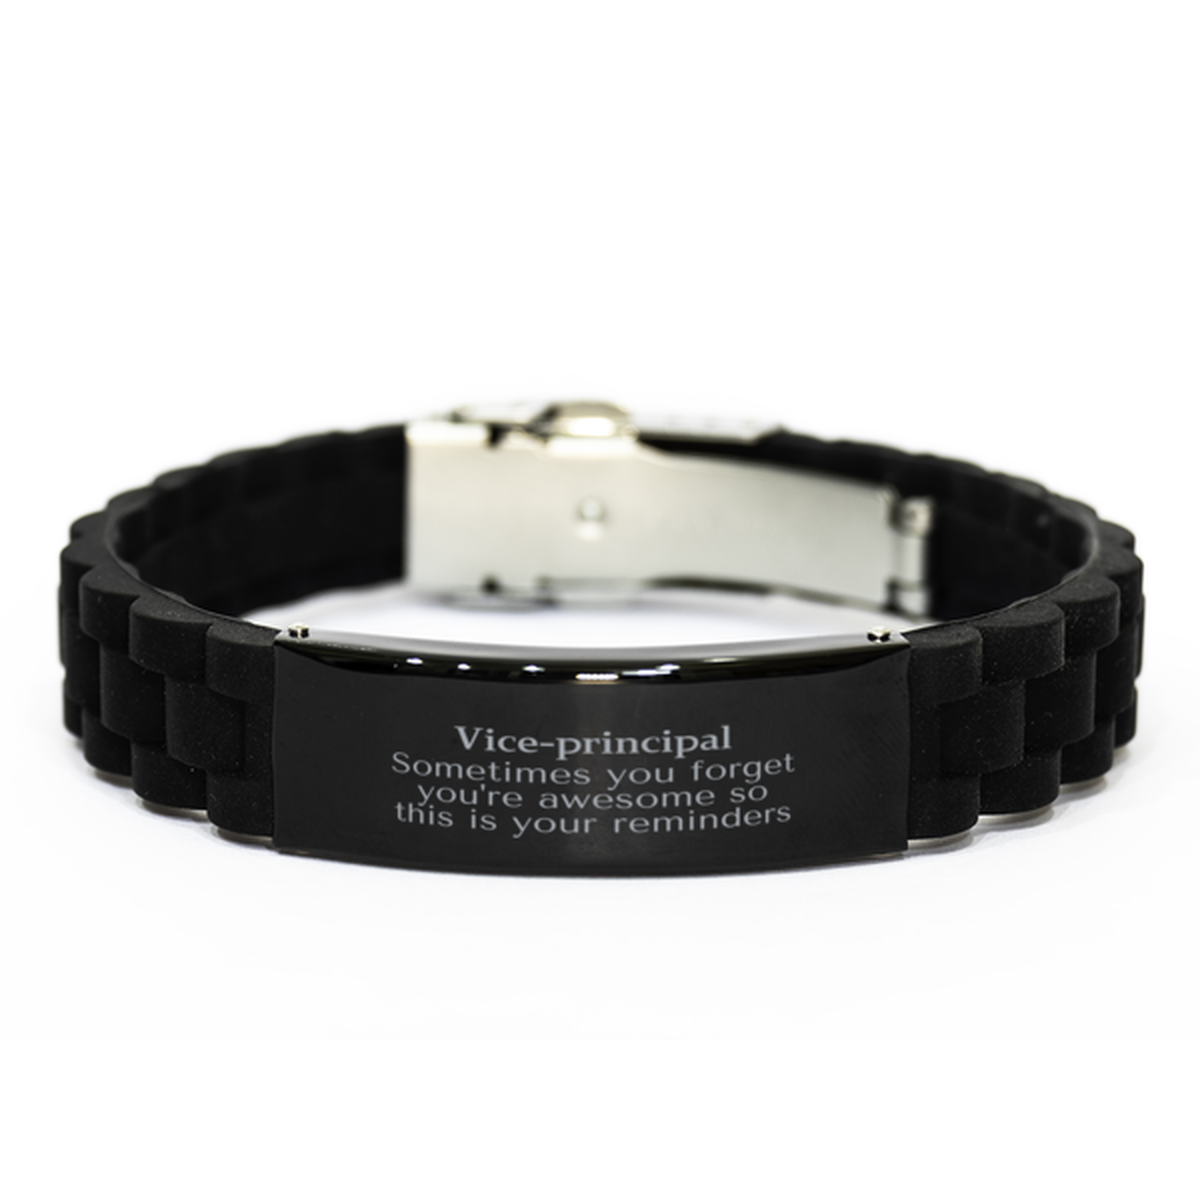 Sentimental Vice-principal Black Glidelock Clasp Bracelet, Vice-principal Sometimes you forget you're awesome so this is your reminders, Graduation Christmas Birthday Gifts for Vice-principal, Men, Women, Coworkers